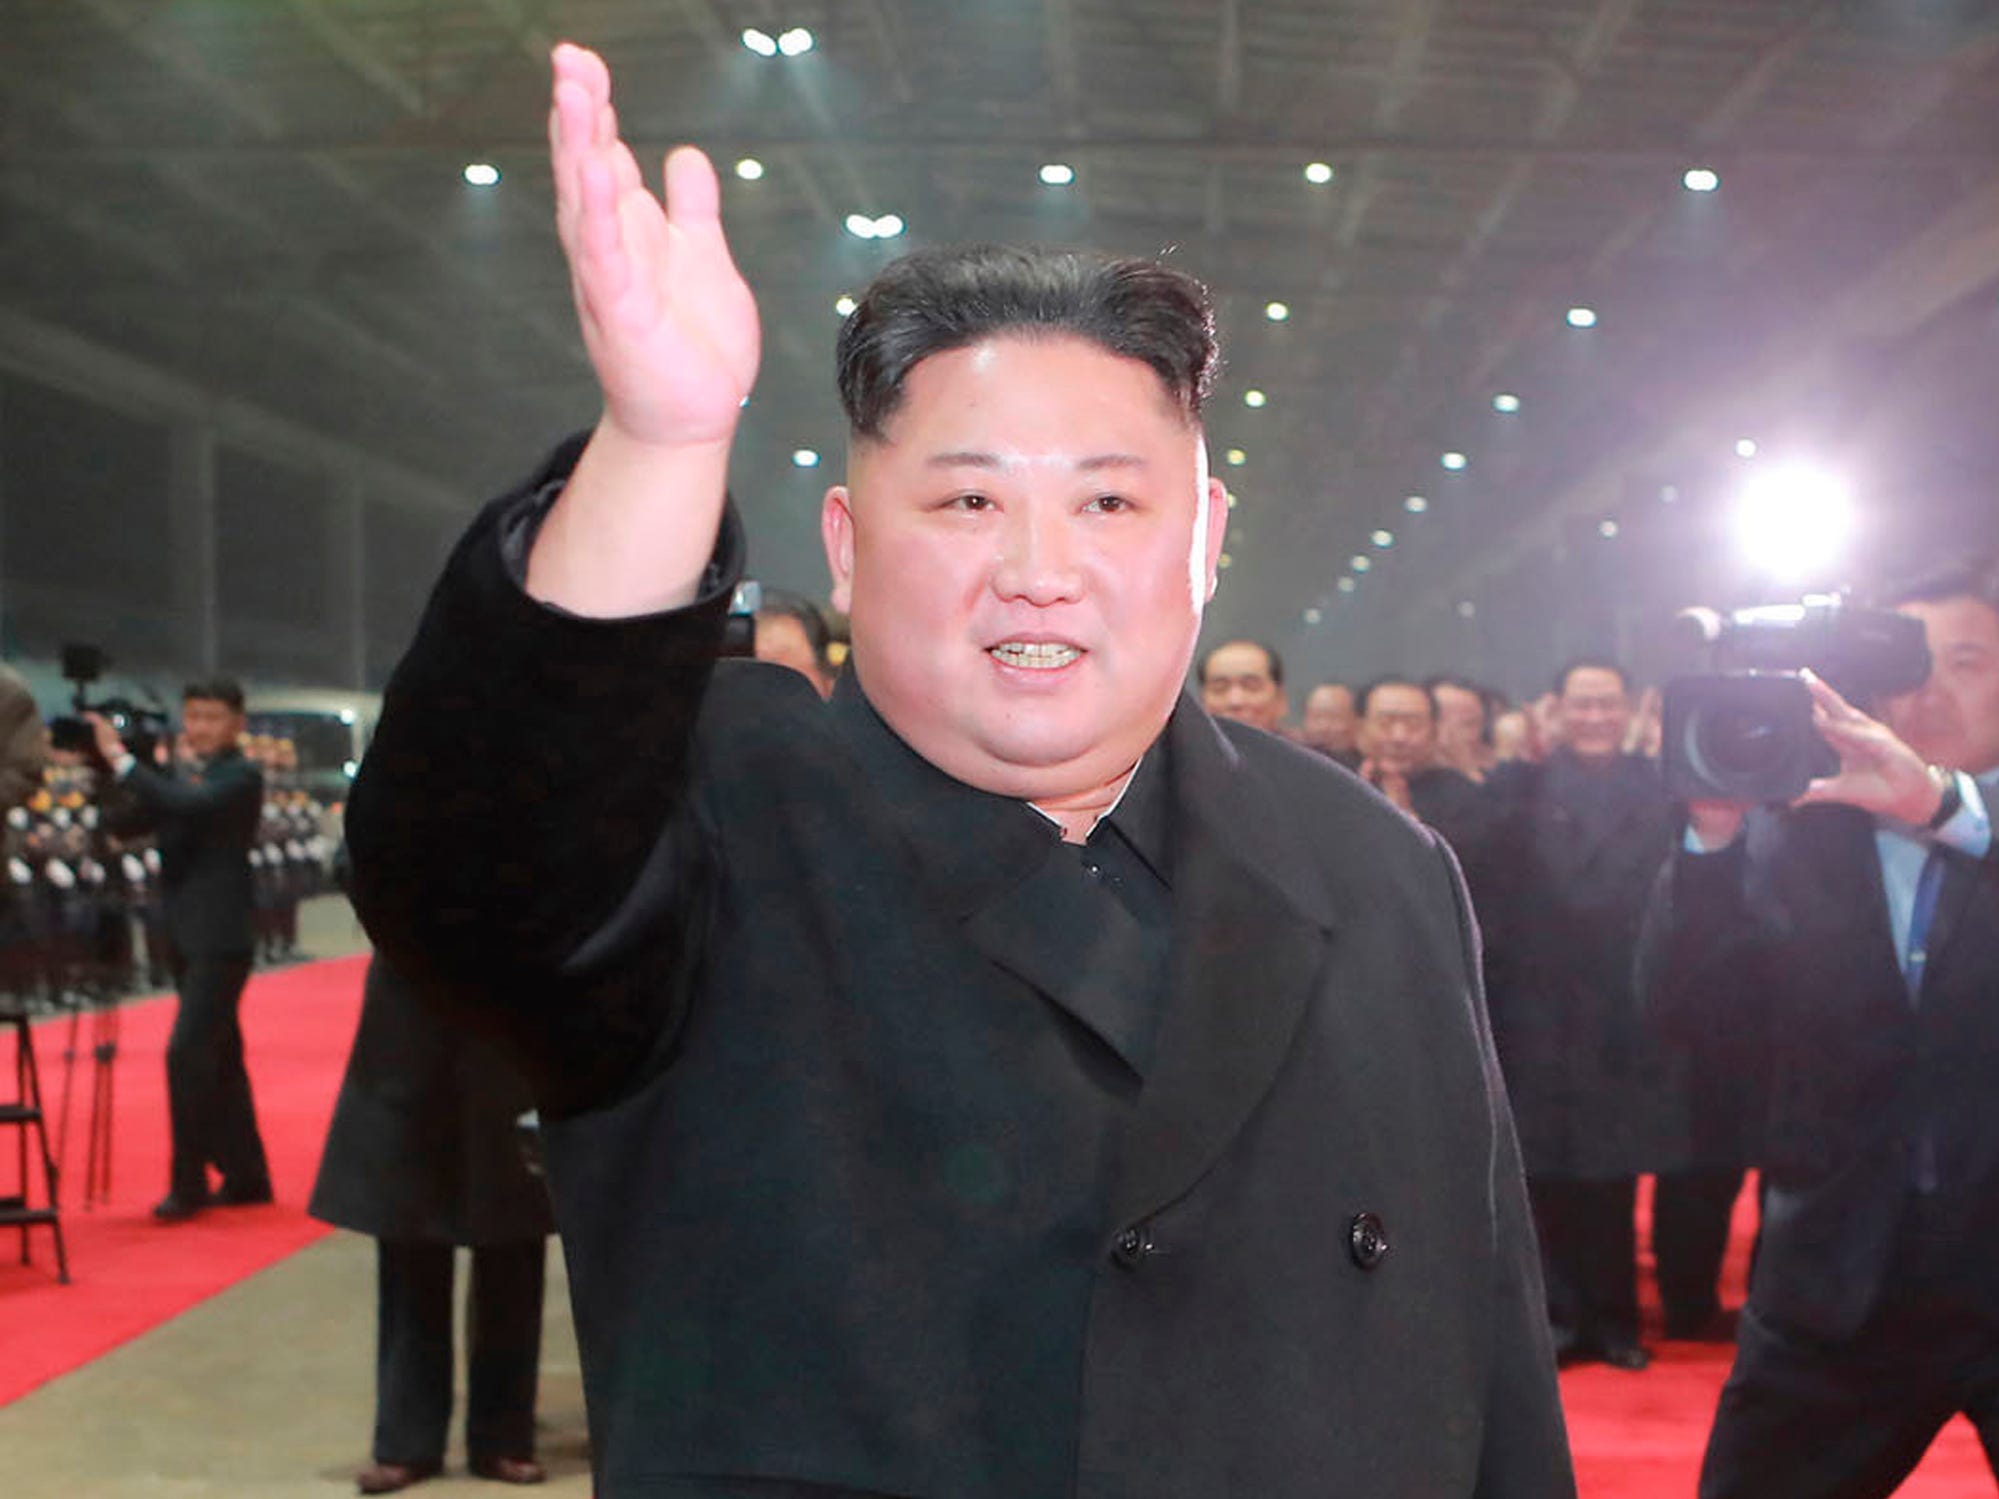 In this March 5, 2019, photo provided by the North Korean government,  North Korean leader Kim Jong Un arrives at Pyongyang station after his visit to Vietnam, in Pyongyang. The content of this image is as provided and cannot be independently verified. Korean language watermark on image as provided by source reads: "KCNA" which is the abbreviation for Korean Central News Agency. (Korean Central News Agency/Korea News Service via AP)